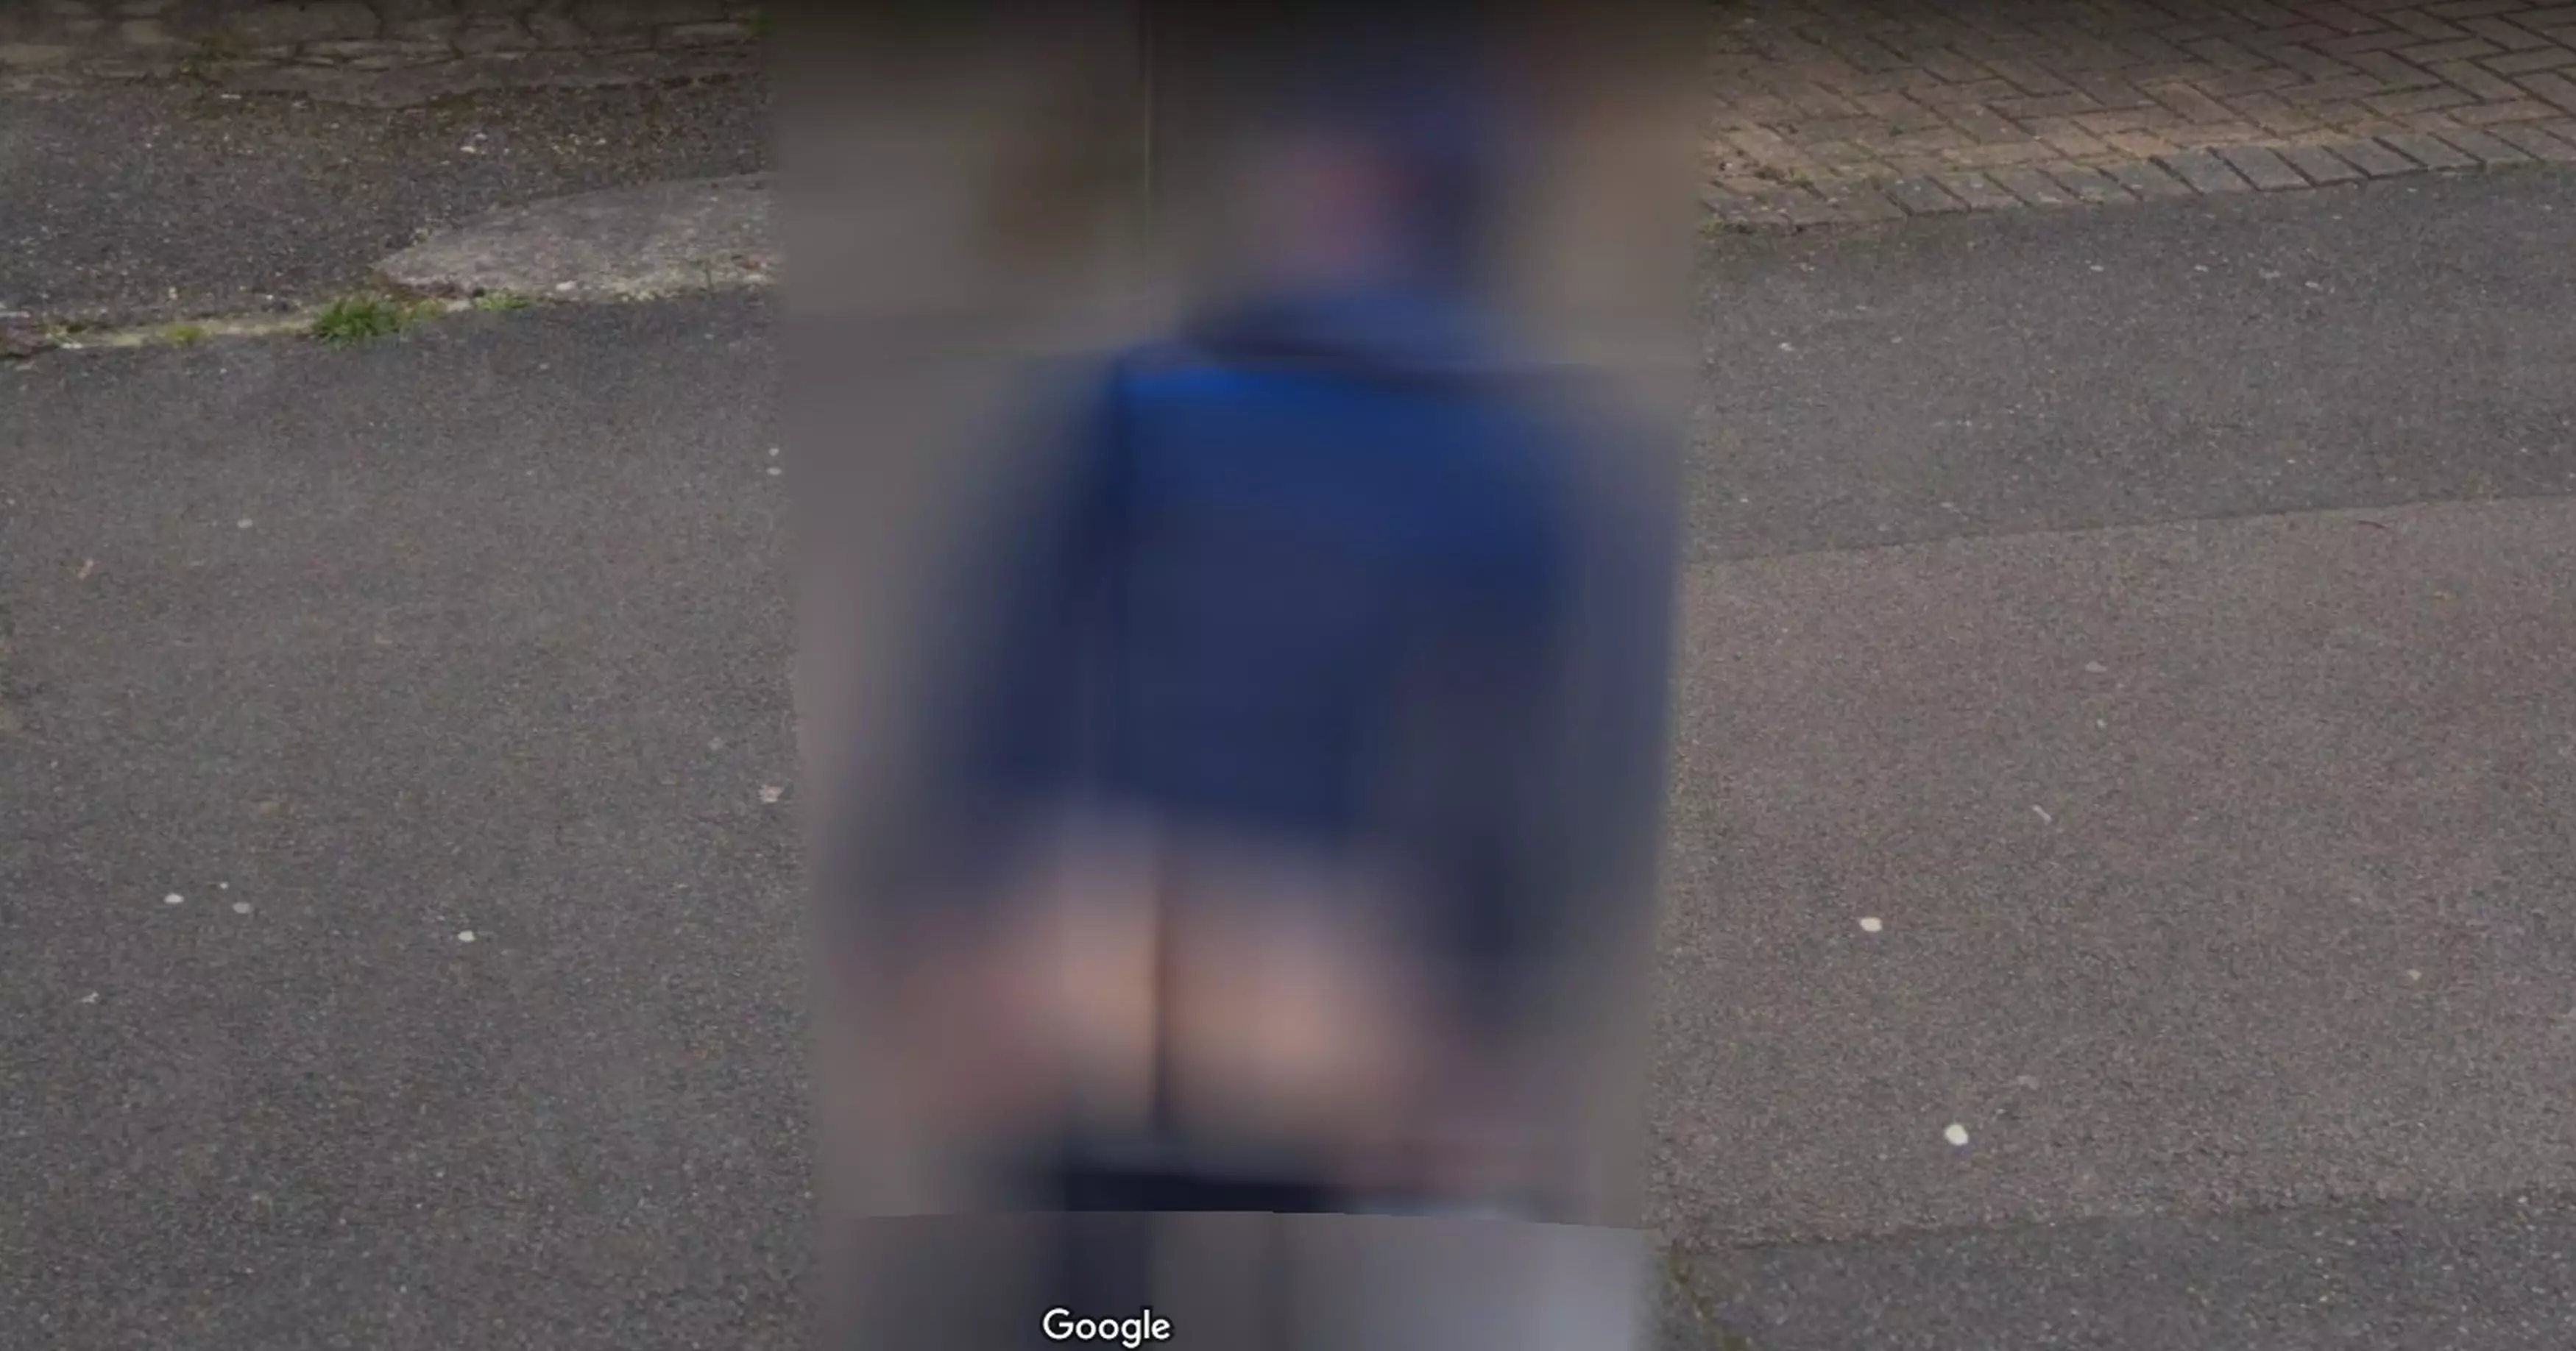 Google caught wind and blurred the moonie.